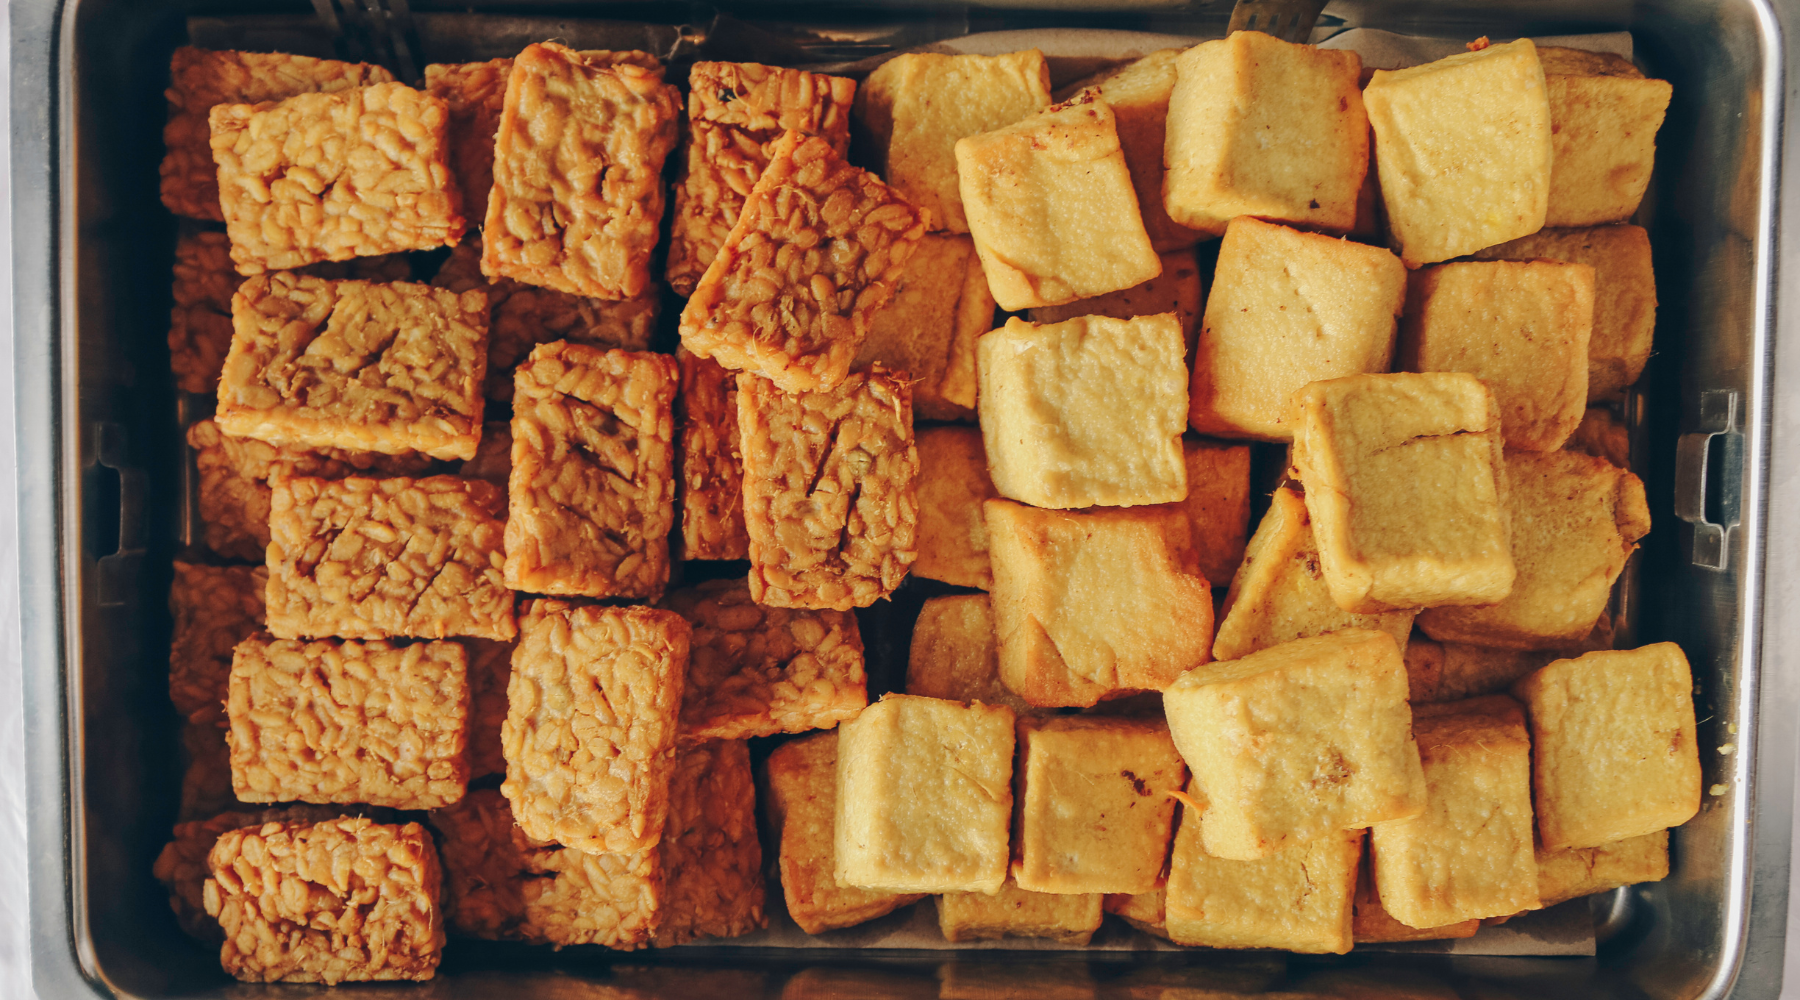 TEMPEH VS. TOFU - WHICH PLANT-BASED PROTEIN REIGNS SUPREME?